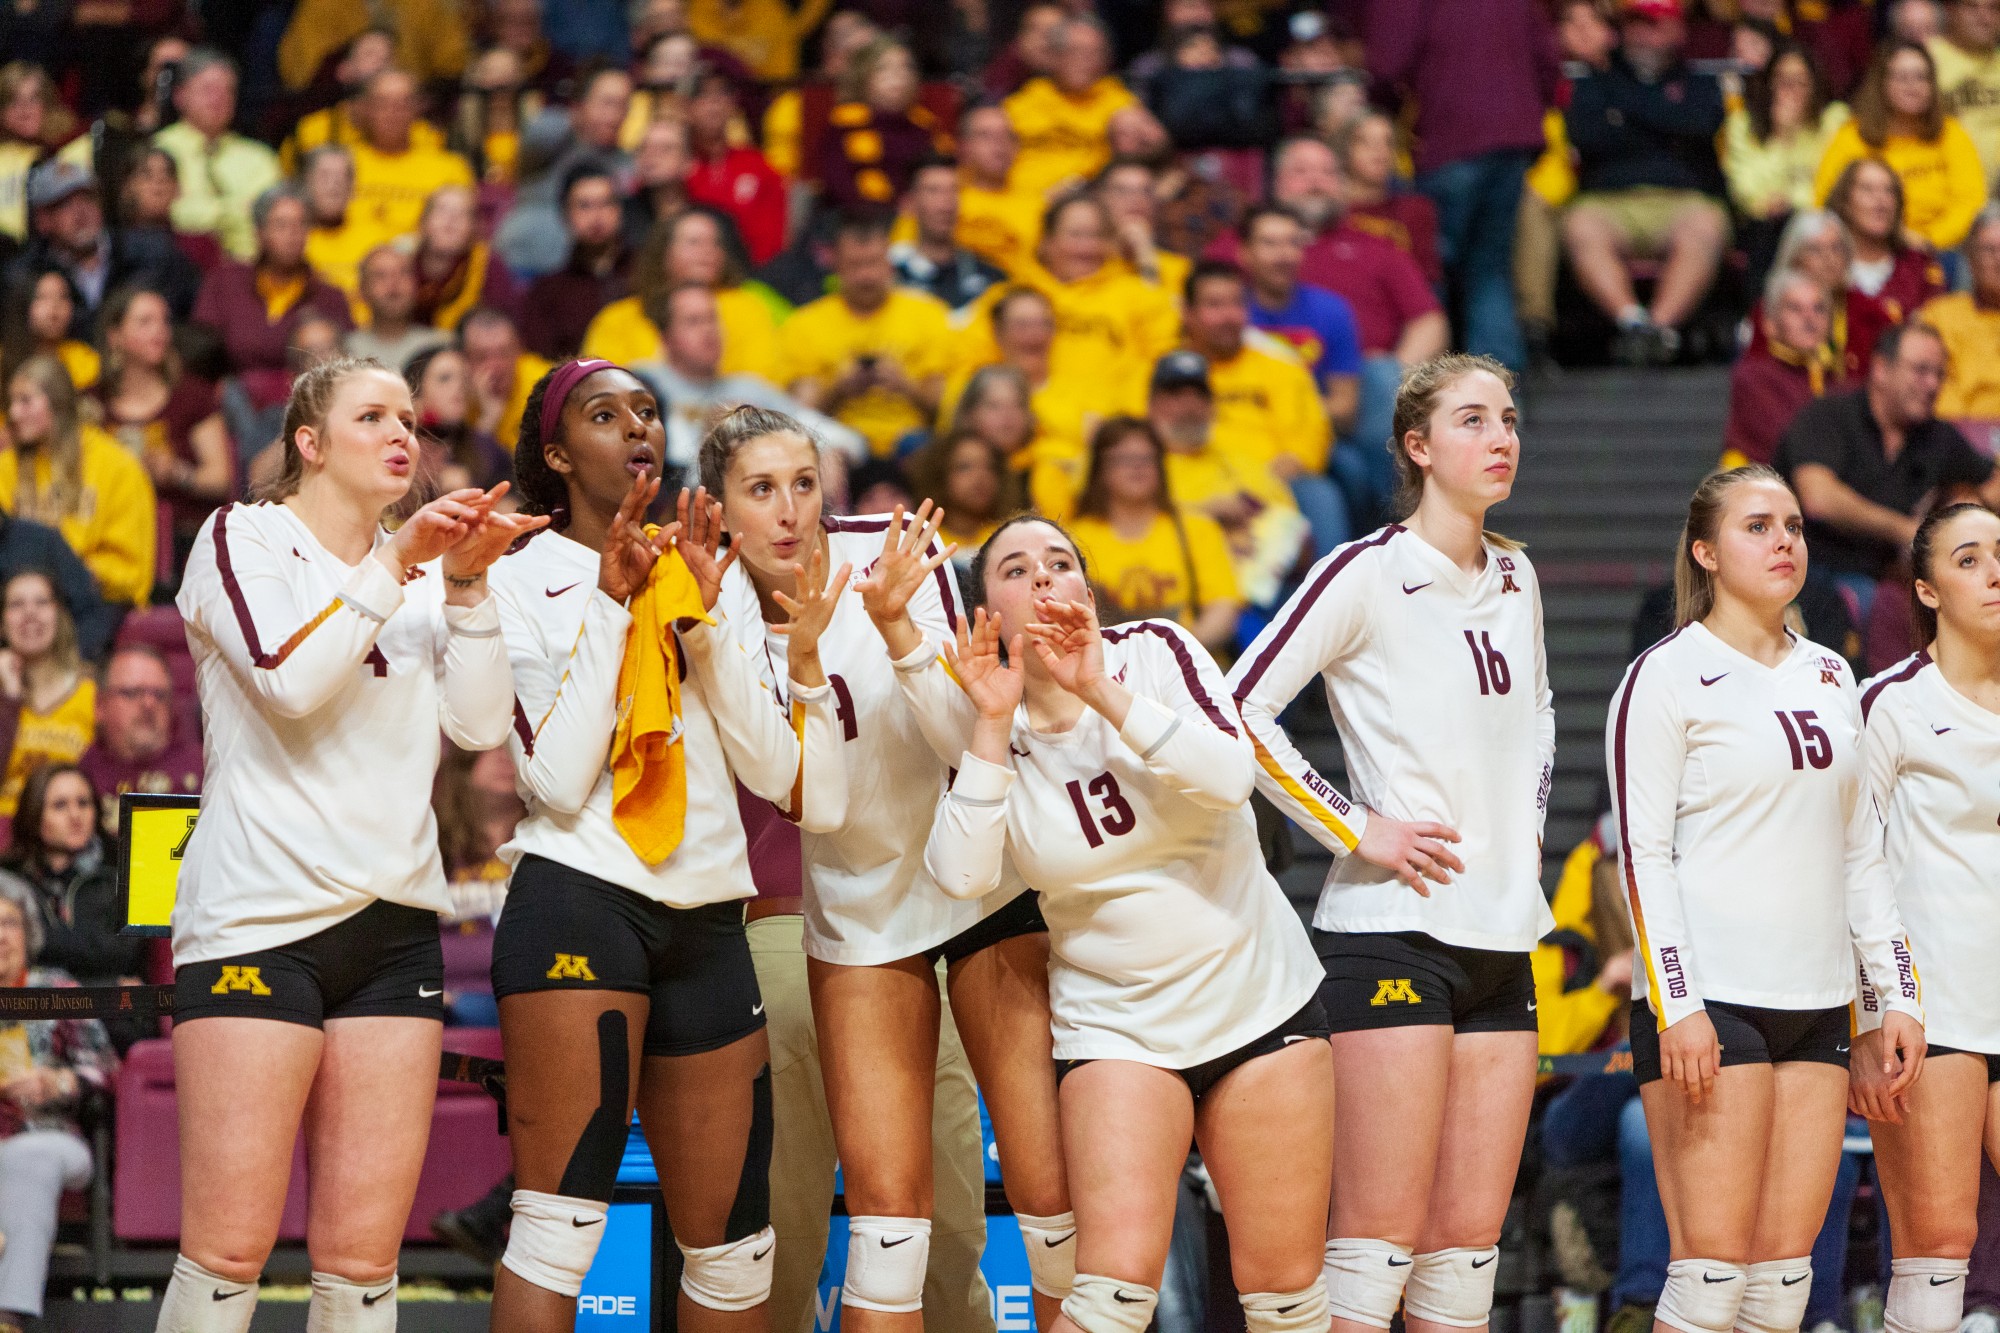 The Gophers watch from the sidelines at the Maturi Pavilion on Thursday, Nov. 14. They ended the night with a 3-1 loss against the Badgers. 